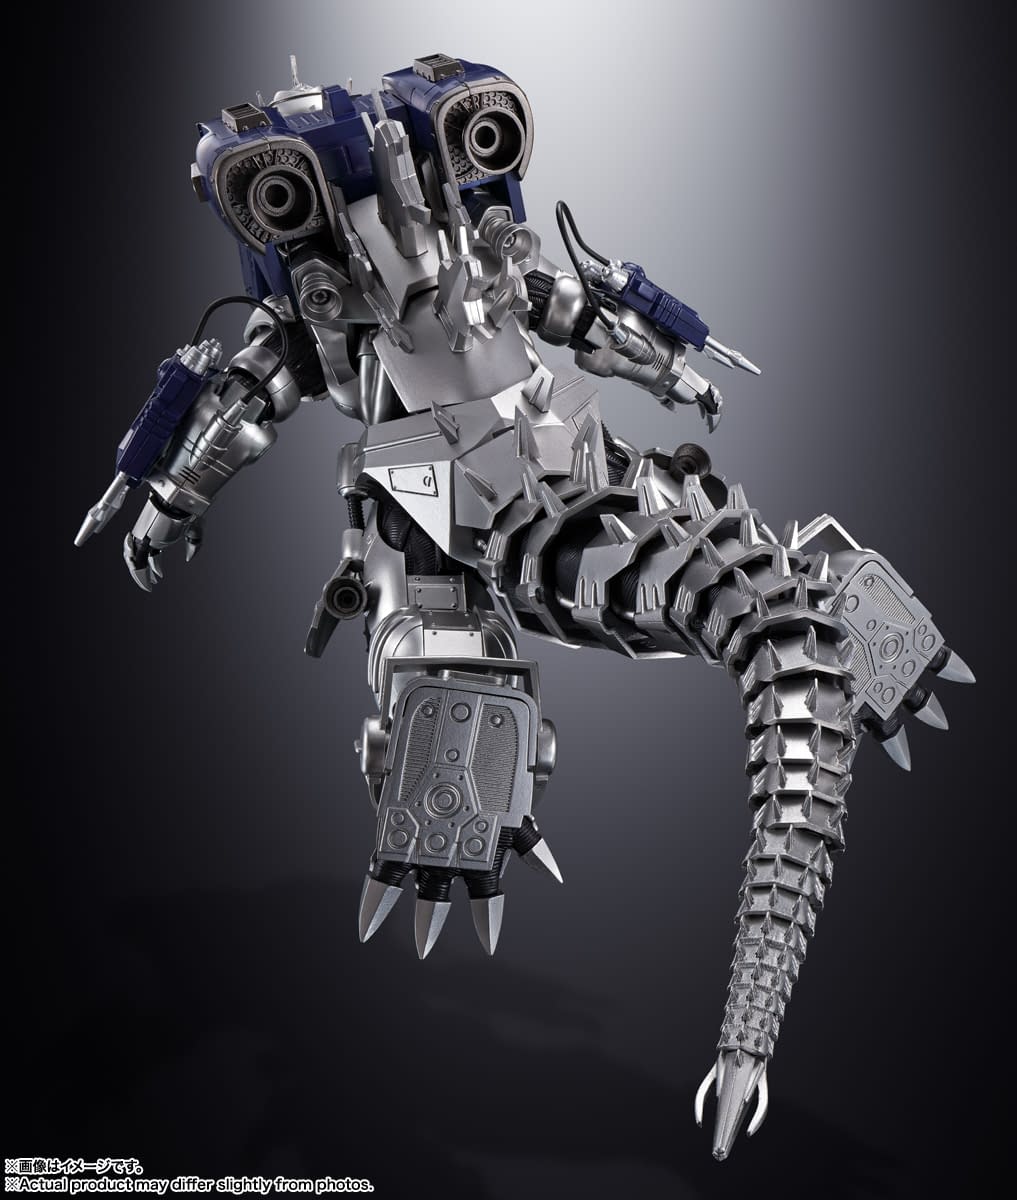 Continue the Reign of Mighty Mechagodzilla with Tamashii Nations